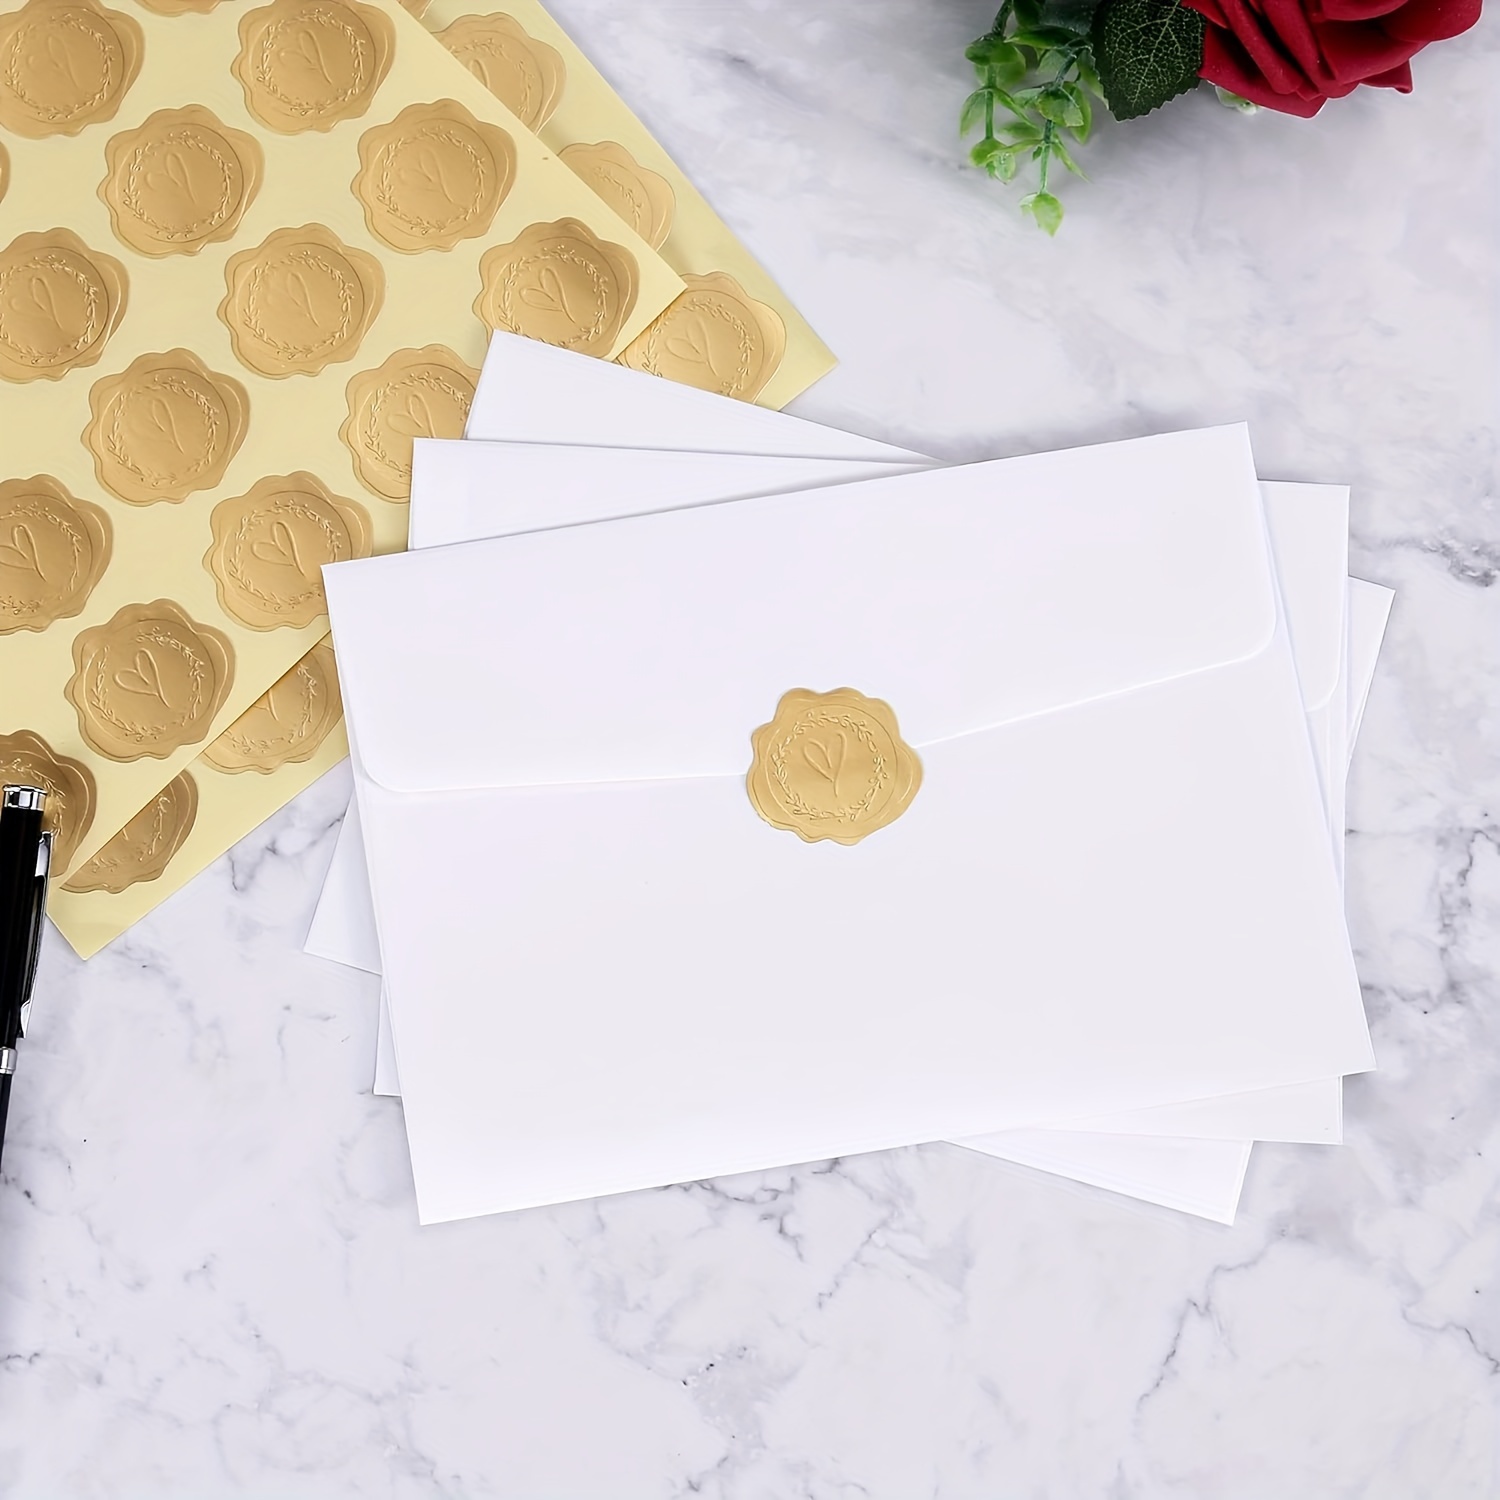 Wax Seal Stickers Envelope Seal Stickers Wedding Invitation Envelope Seals  Self Adhesive Gold Stickers for Party Invitaion, Christmas, Gift Wrapping